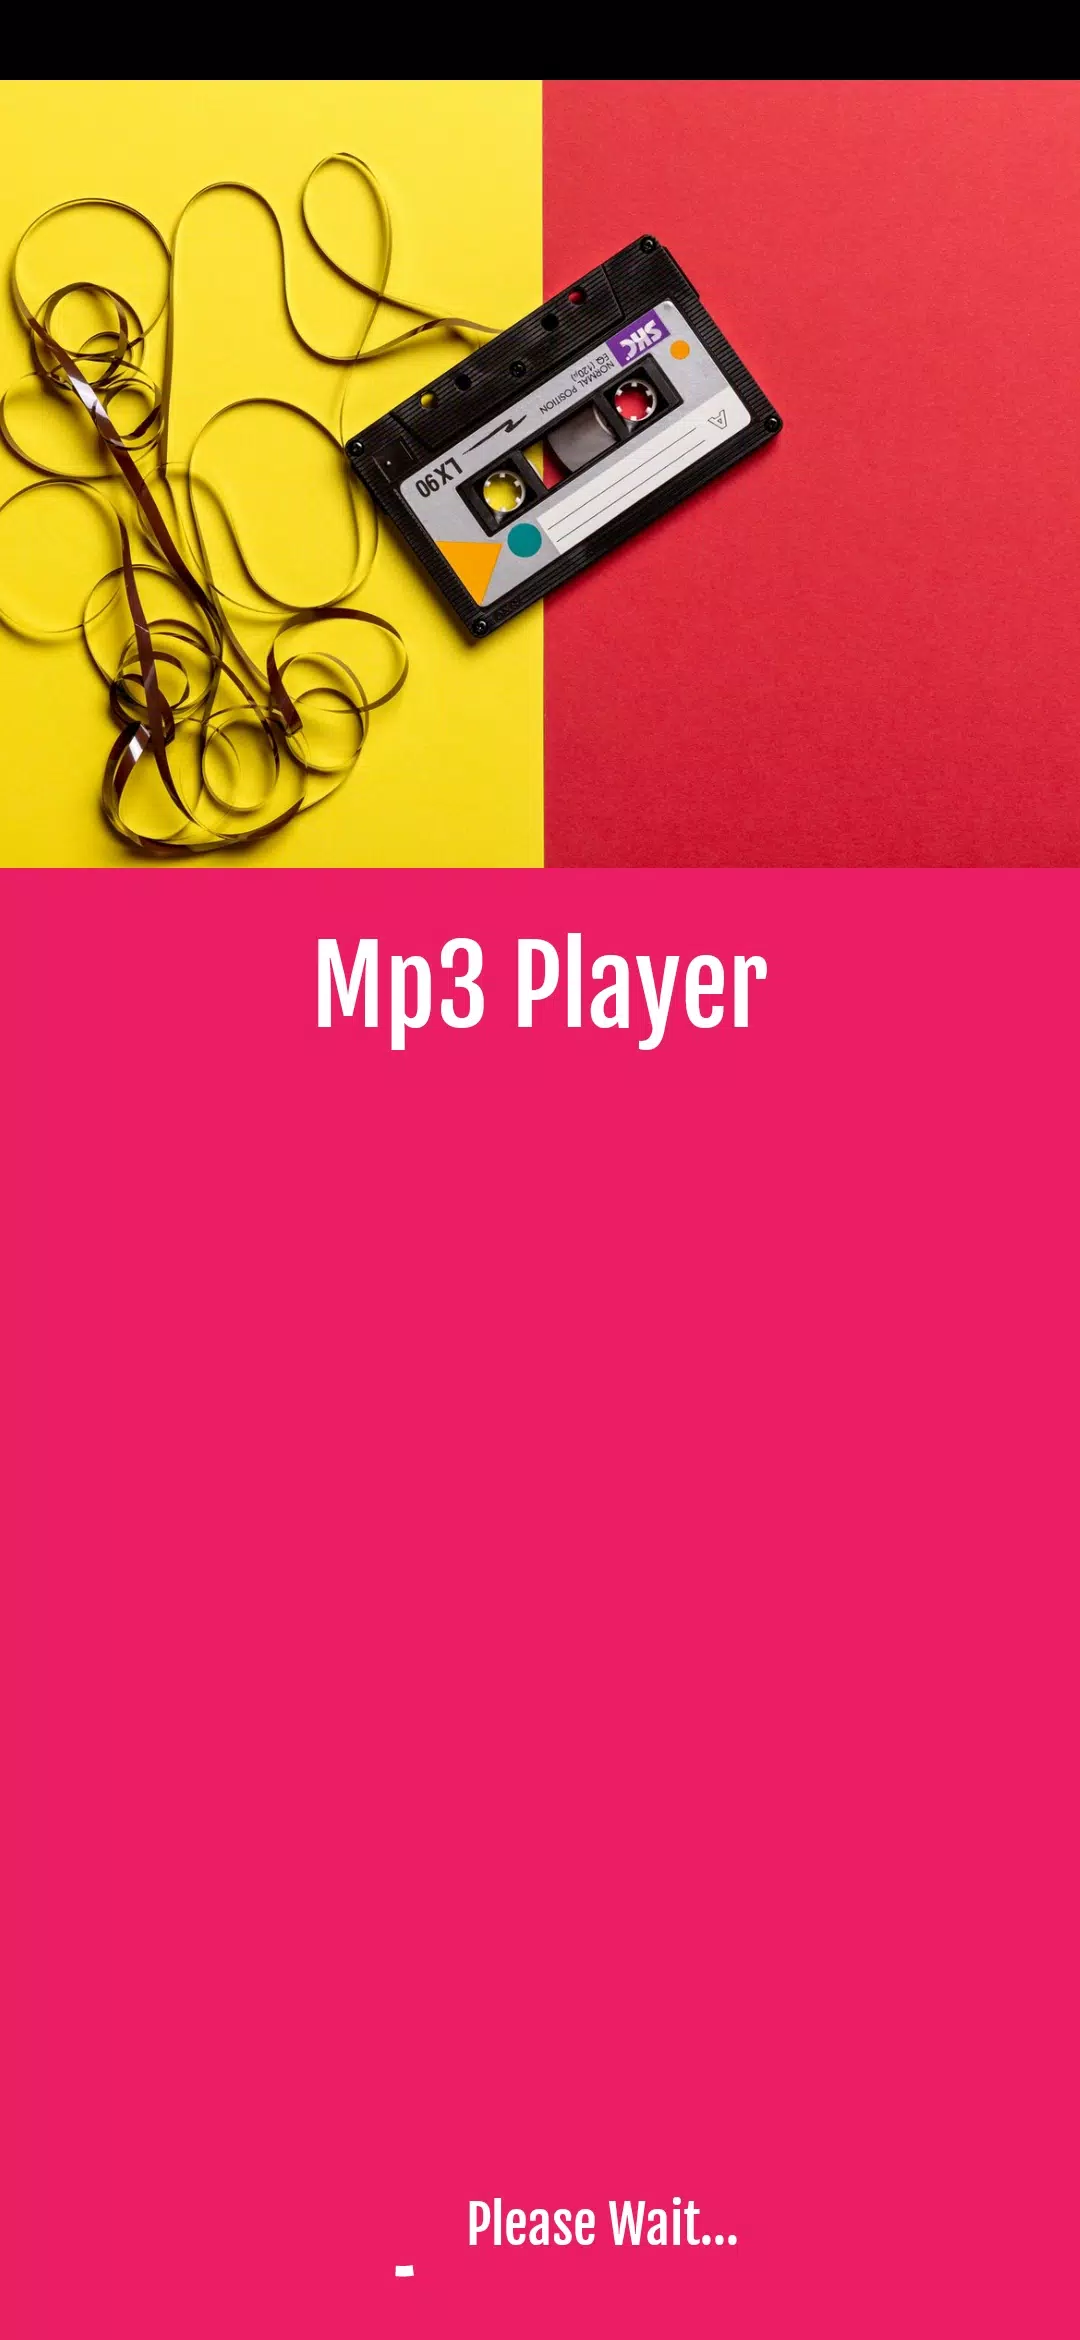 Tube Mp3 Converter for Android - APK Download